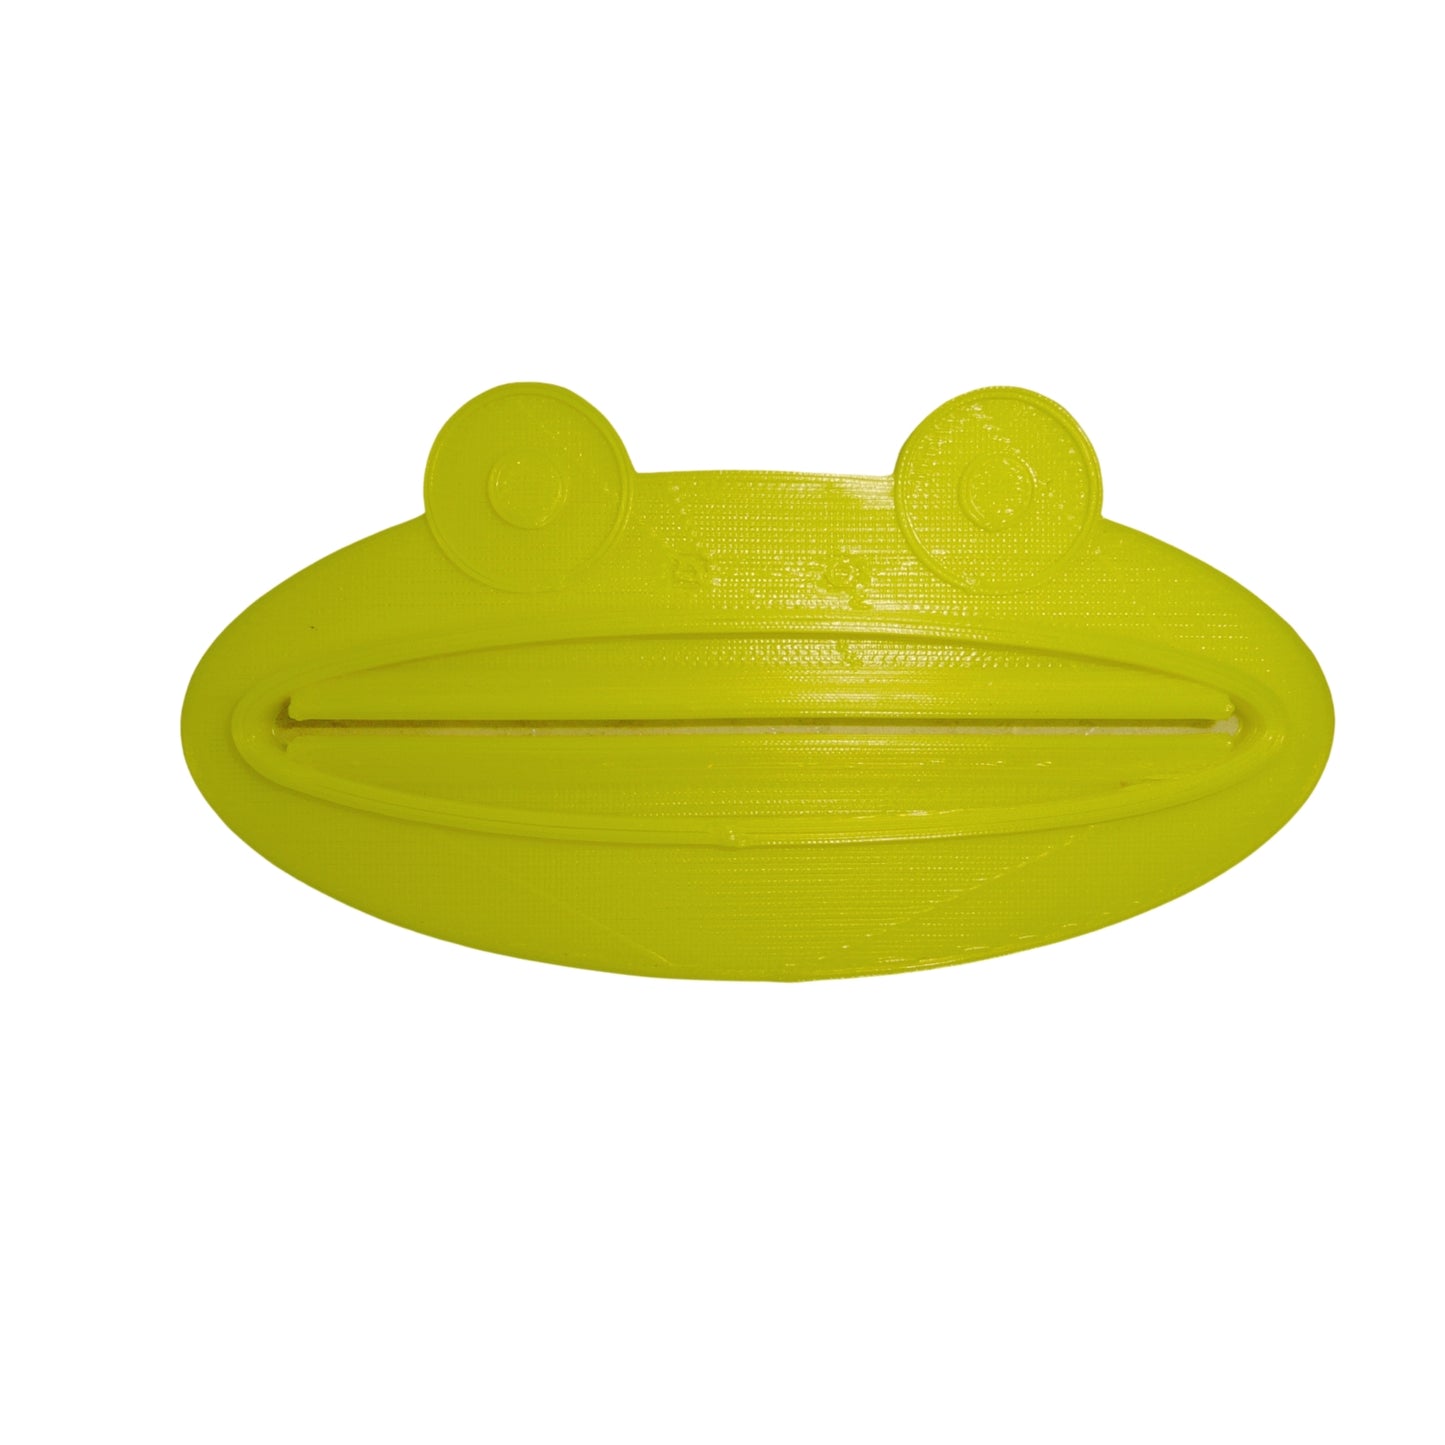 Frog Toothpaste Tube Squeezer Cosmetic Dispenser Made in USA PR109